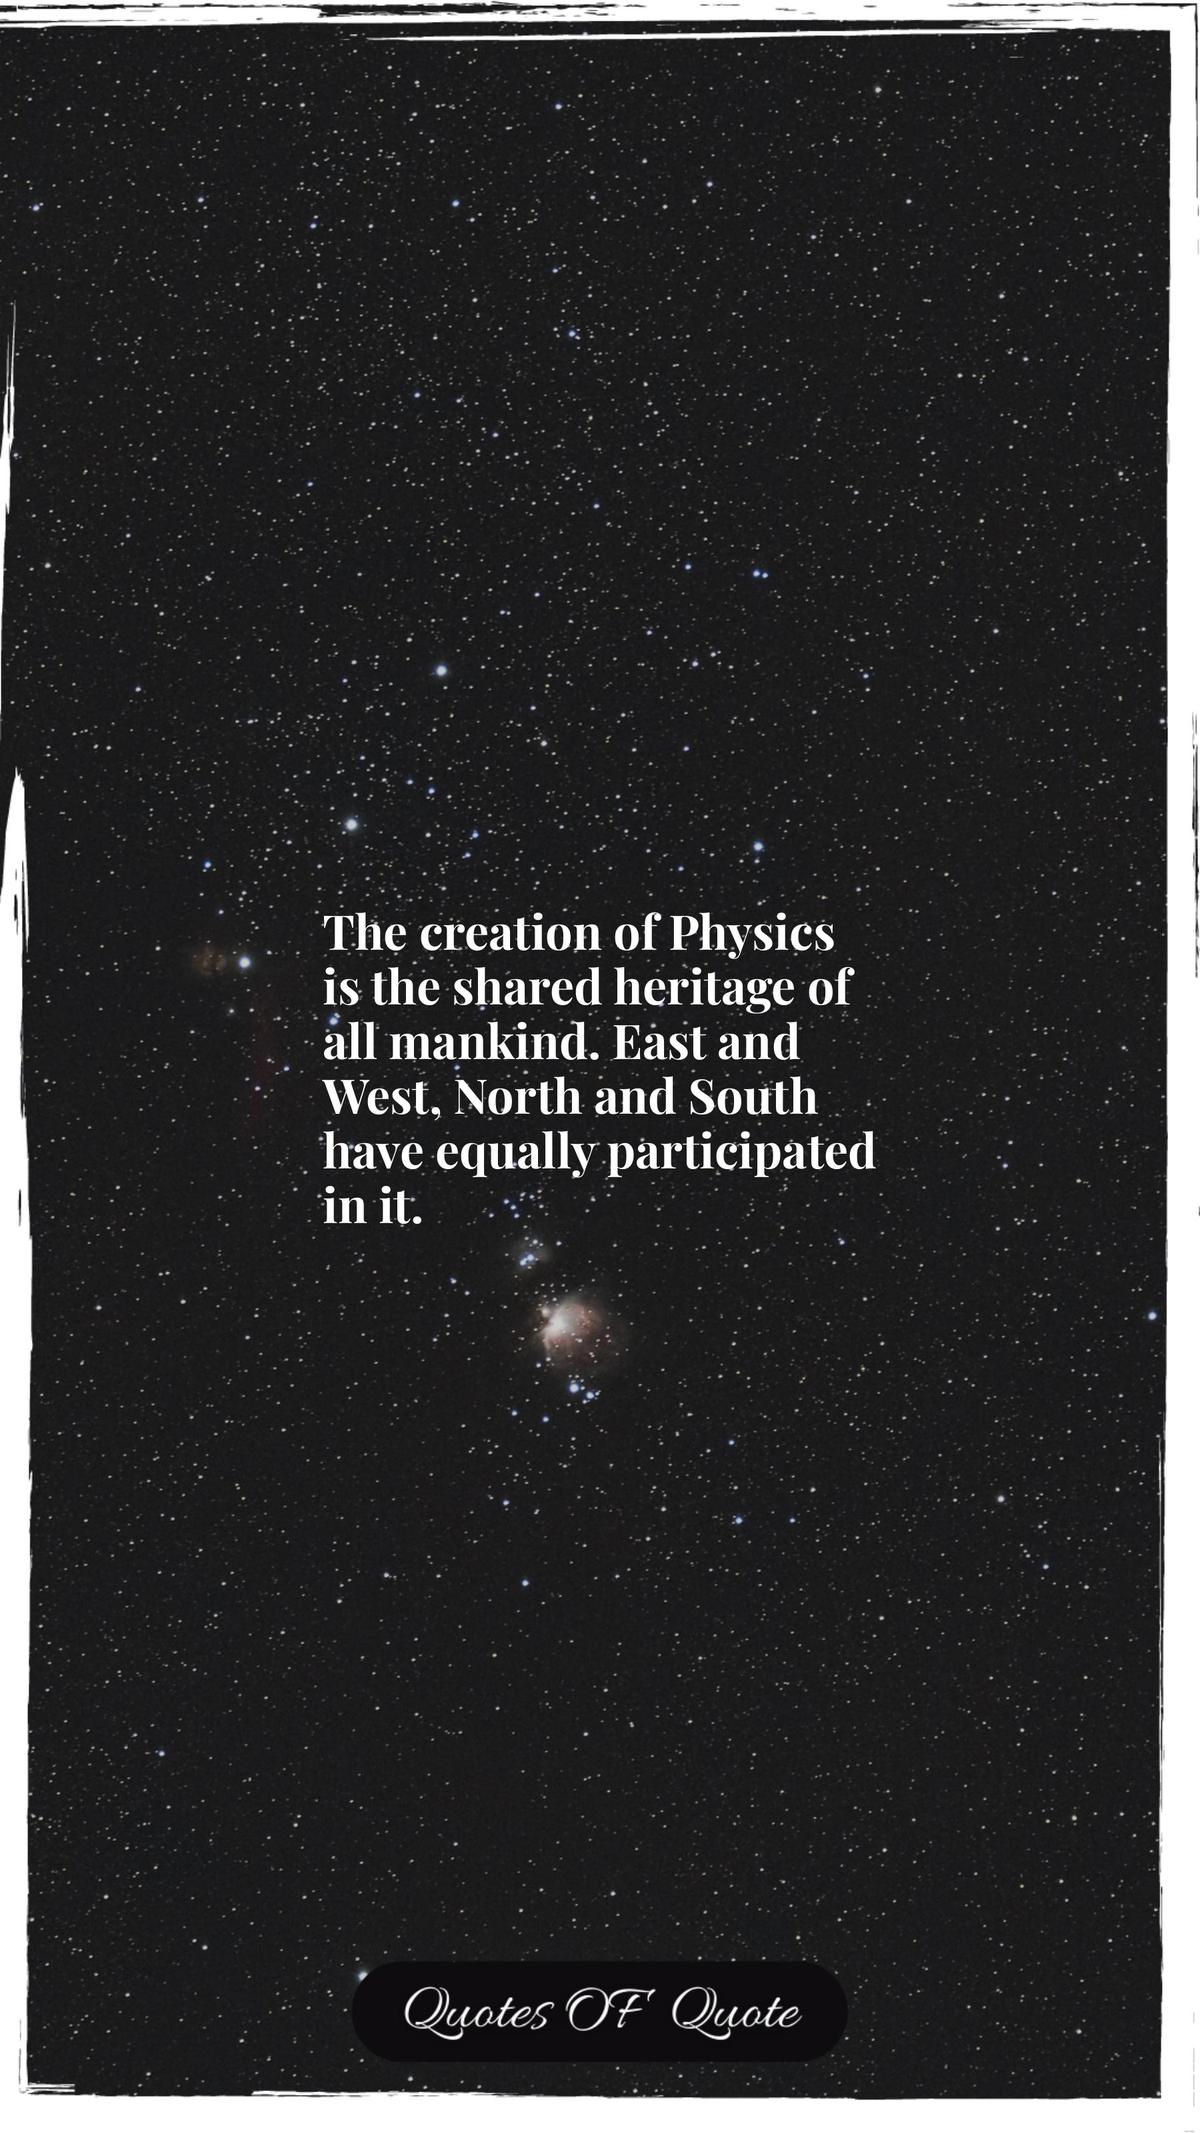 The creation of Physics is the shared heritage of all mankind. East and West, North and South have equally participated in it.